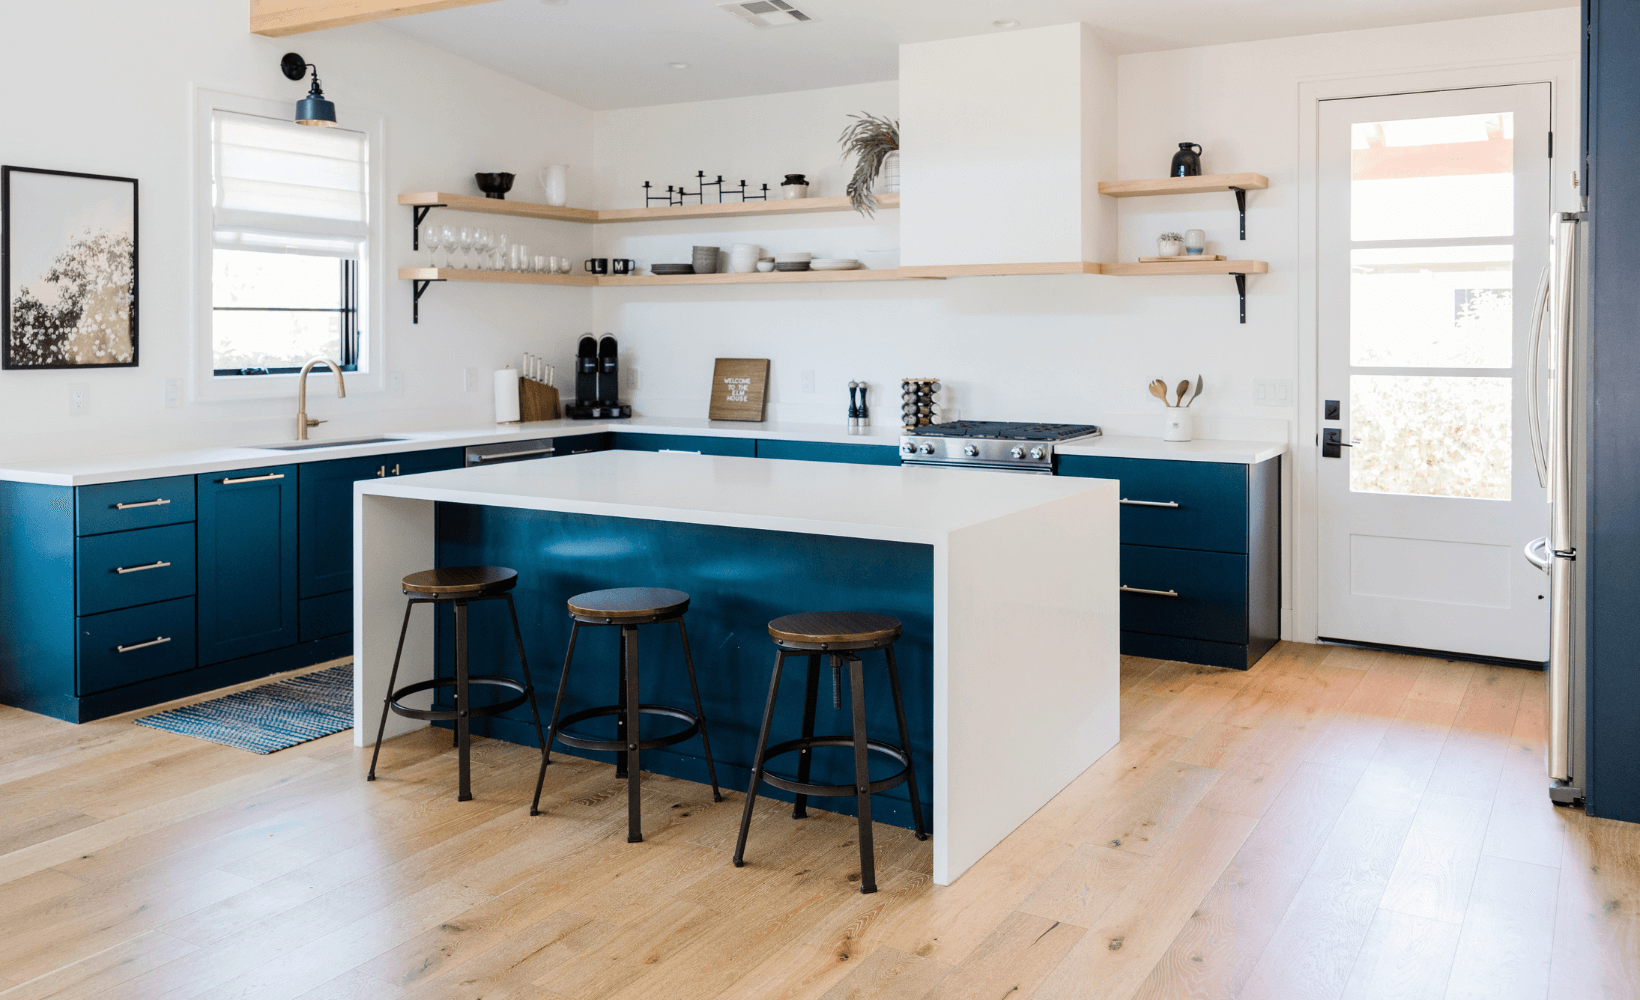 Quick Kitchen Renovation with Minimal Effort and Expense